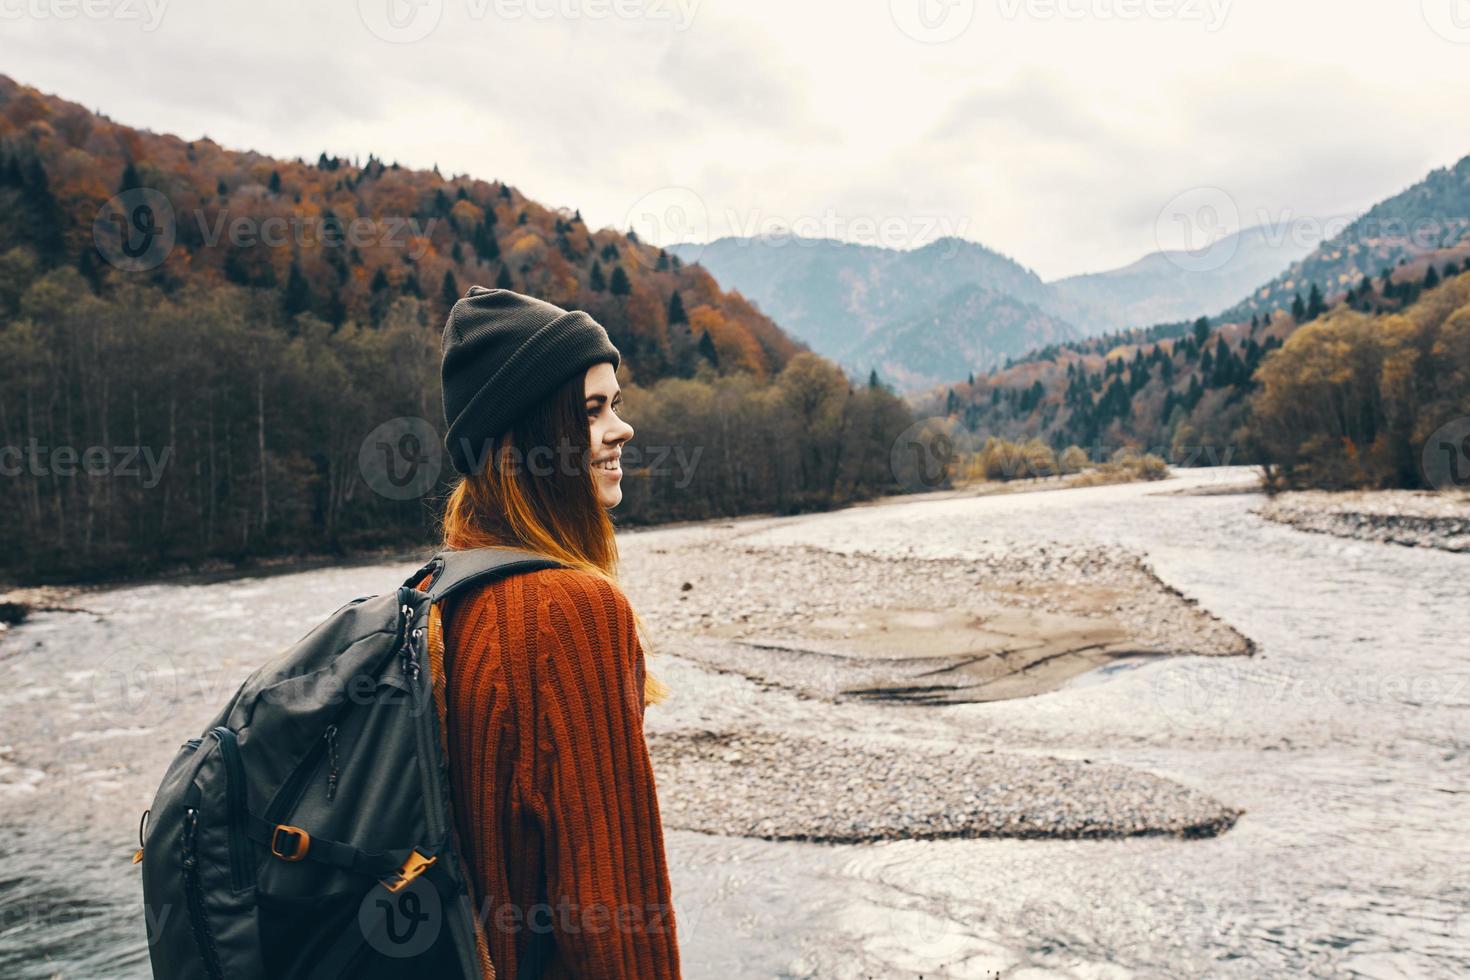 portrait of woman traveler in mountains outdoors near river landscape cropped view photo